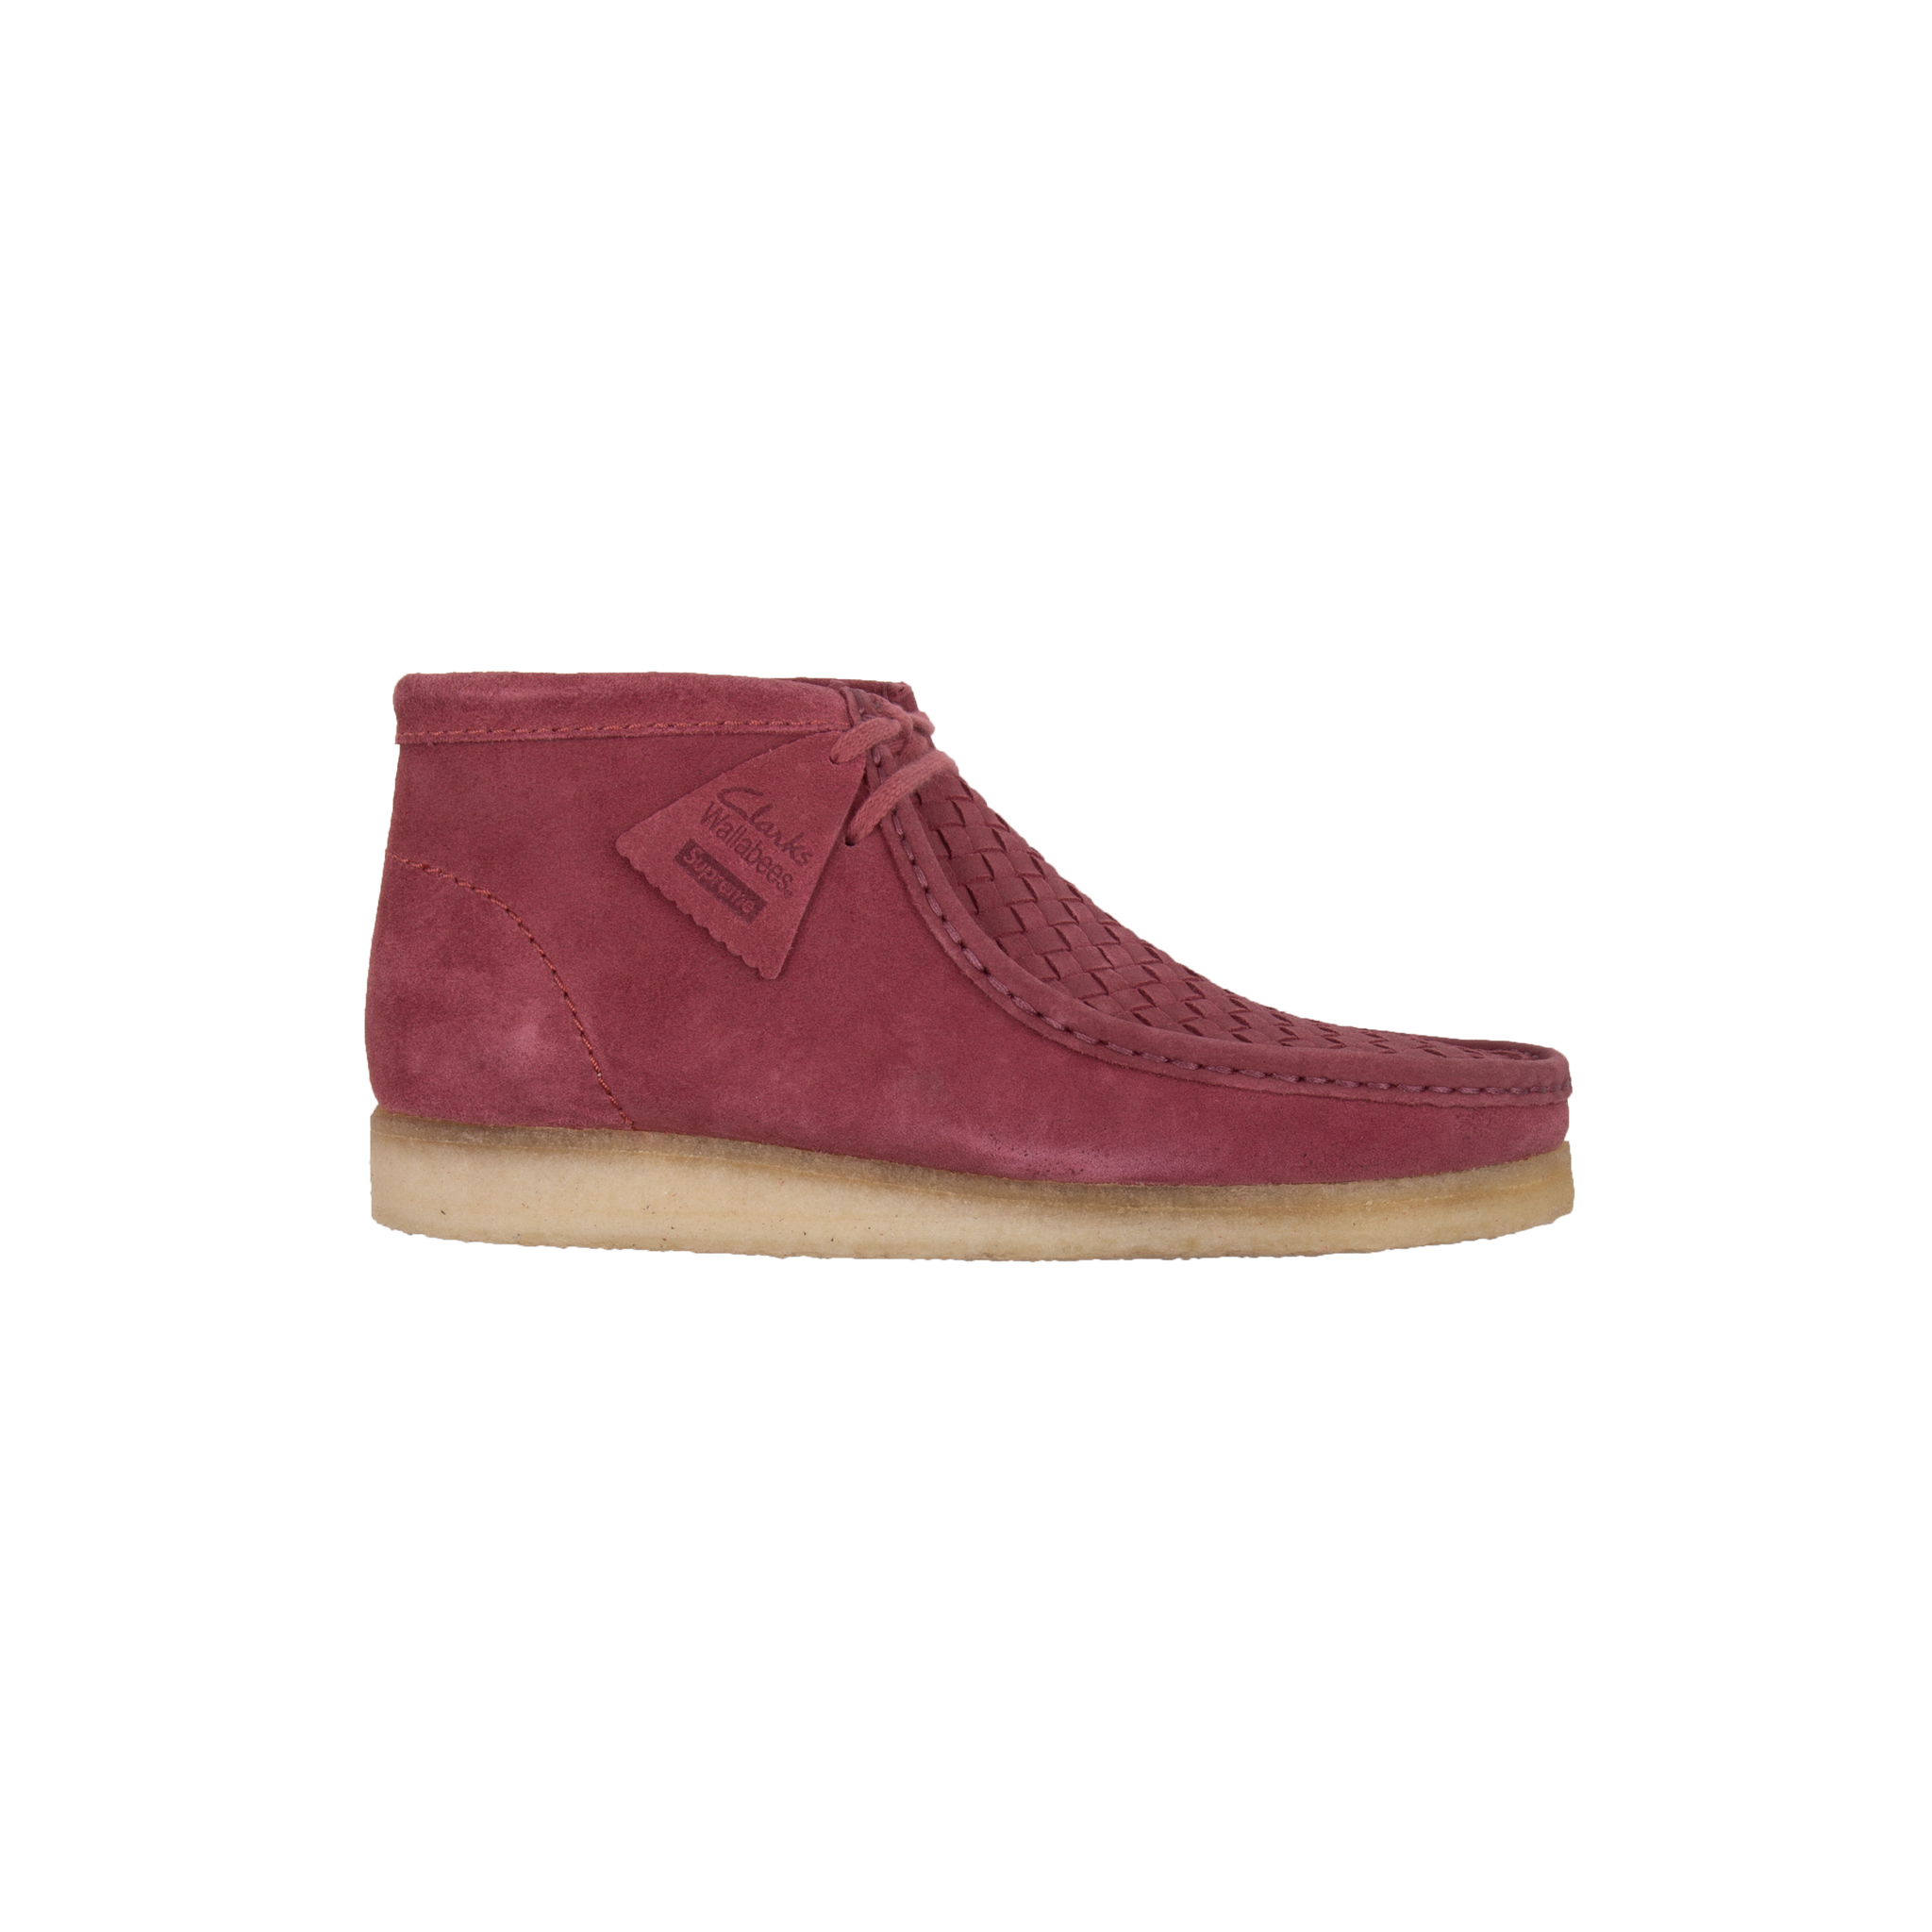 Supreme Rose Clarks Wallabees